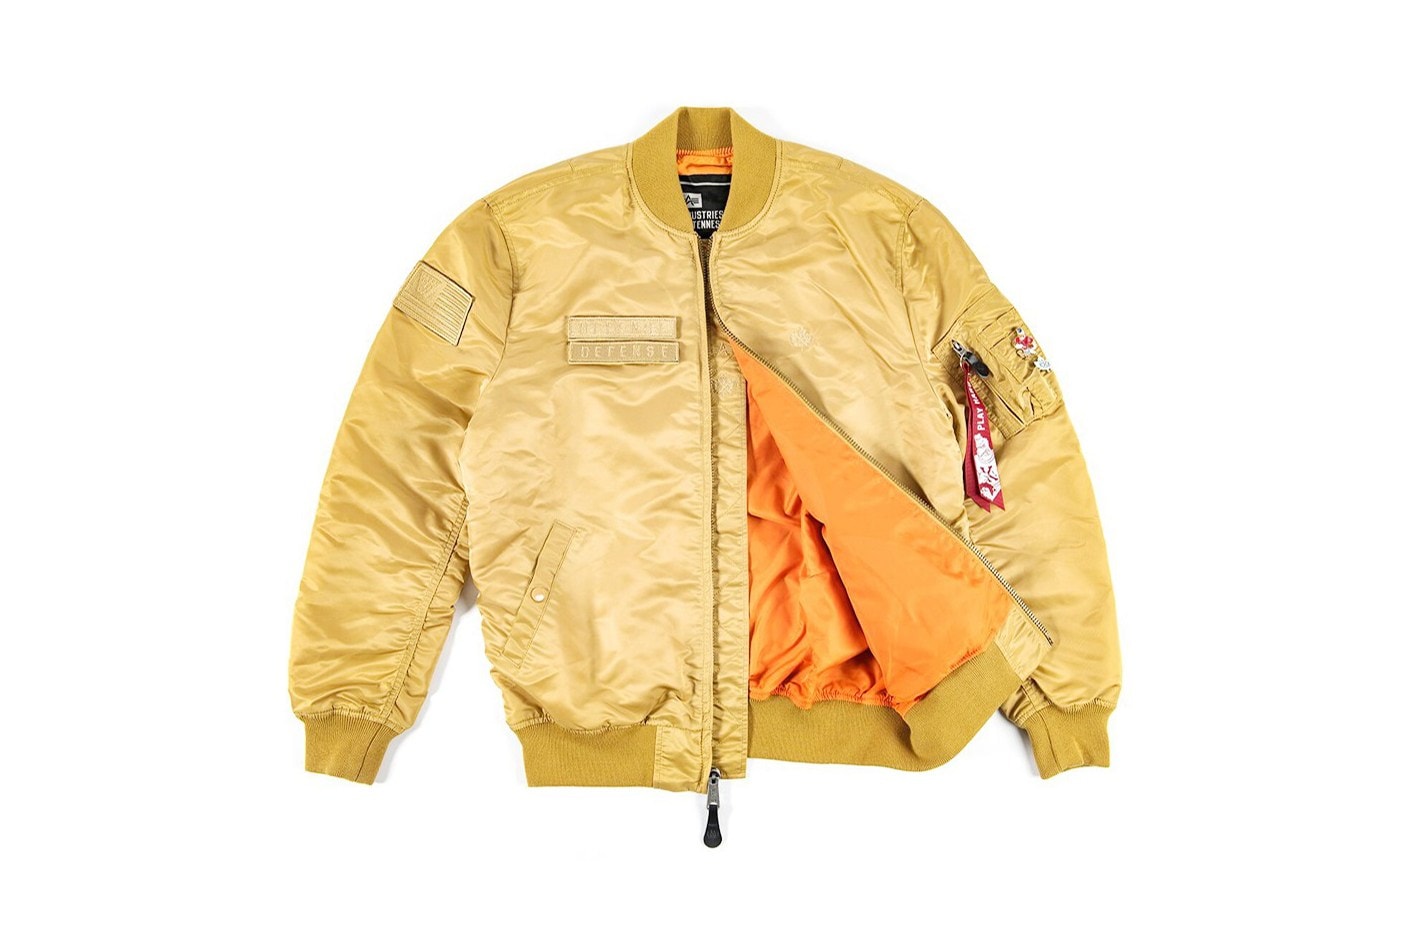 Alpha Industries x K1X "The Gold Rush Pack"